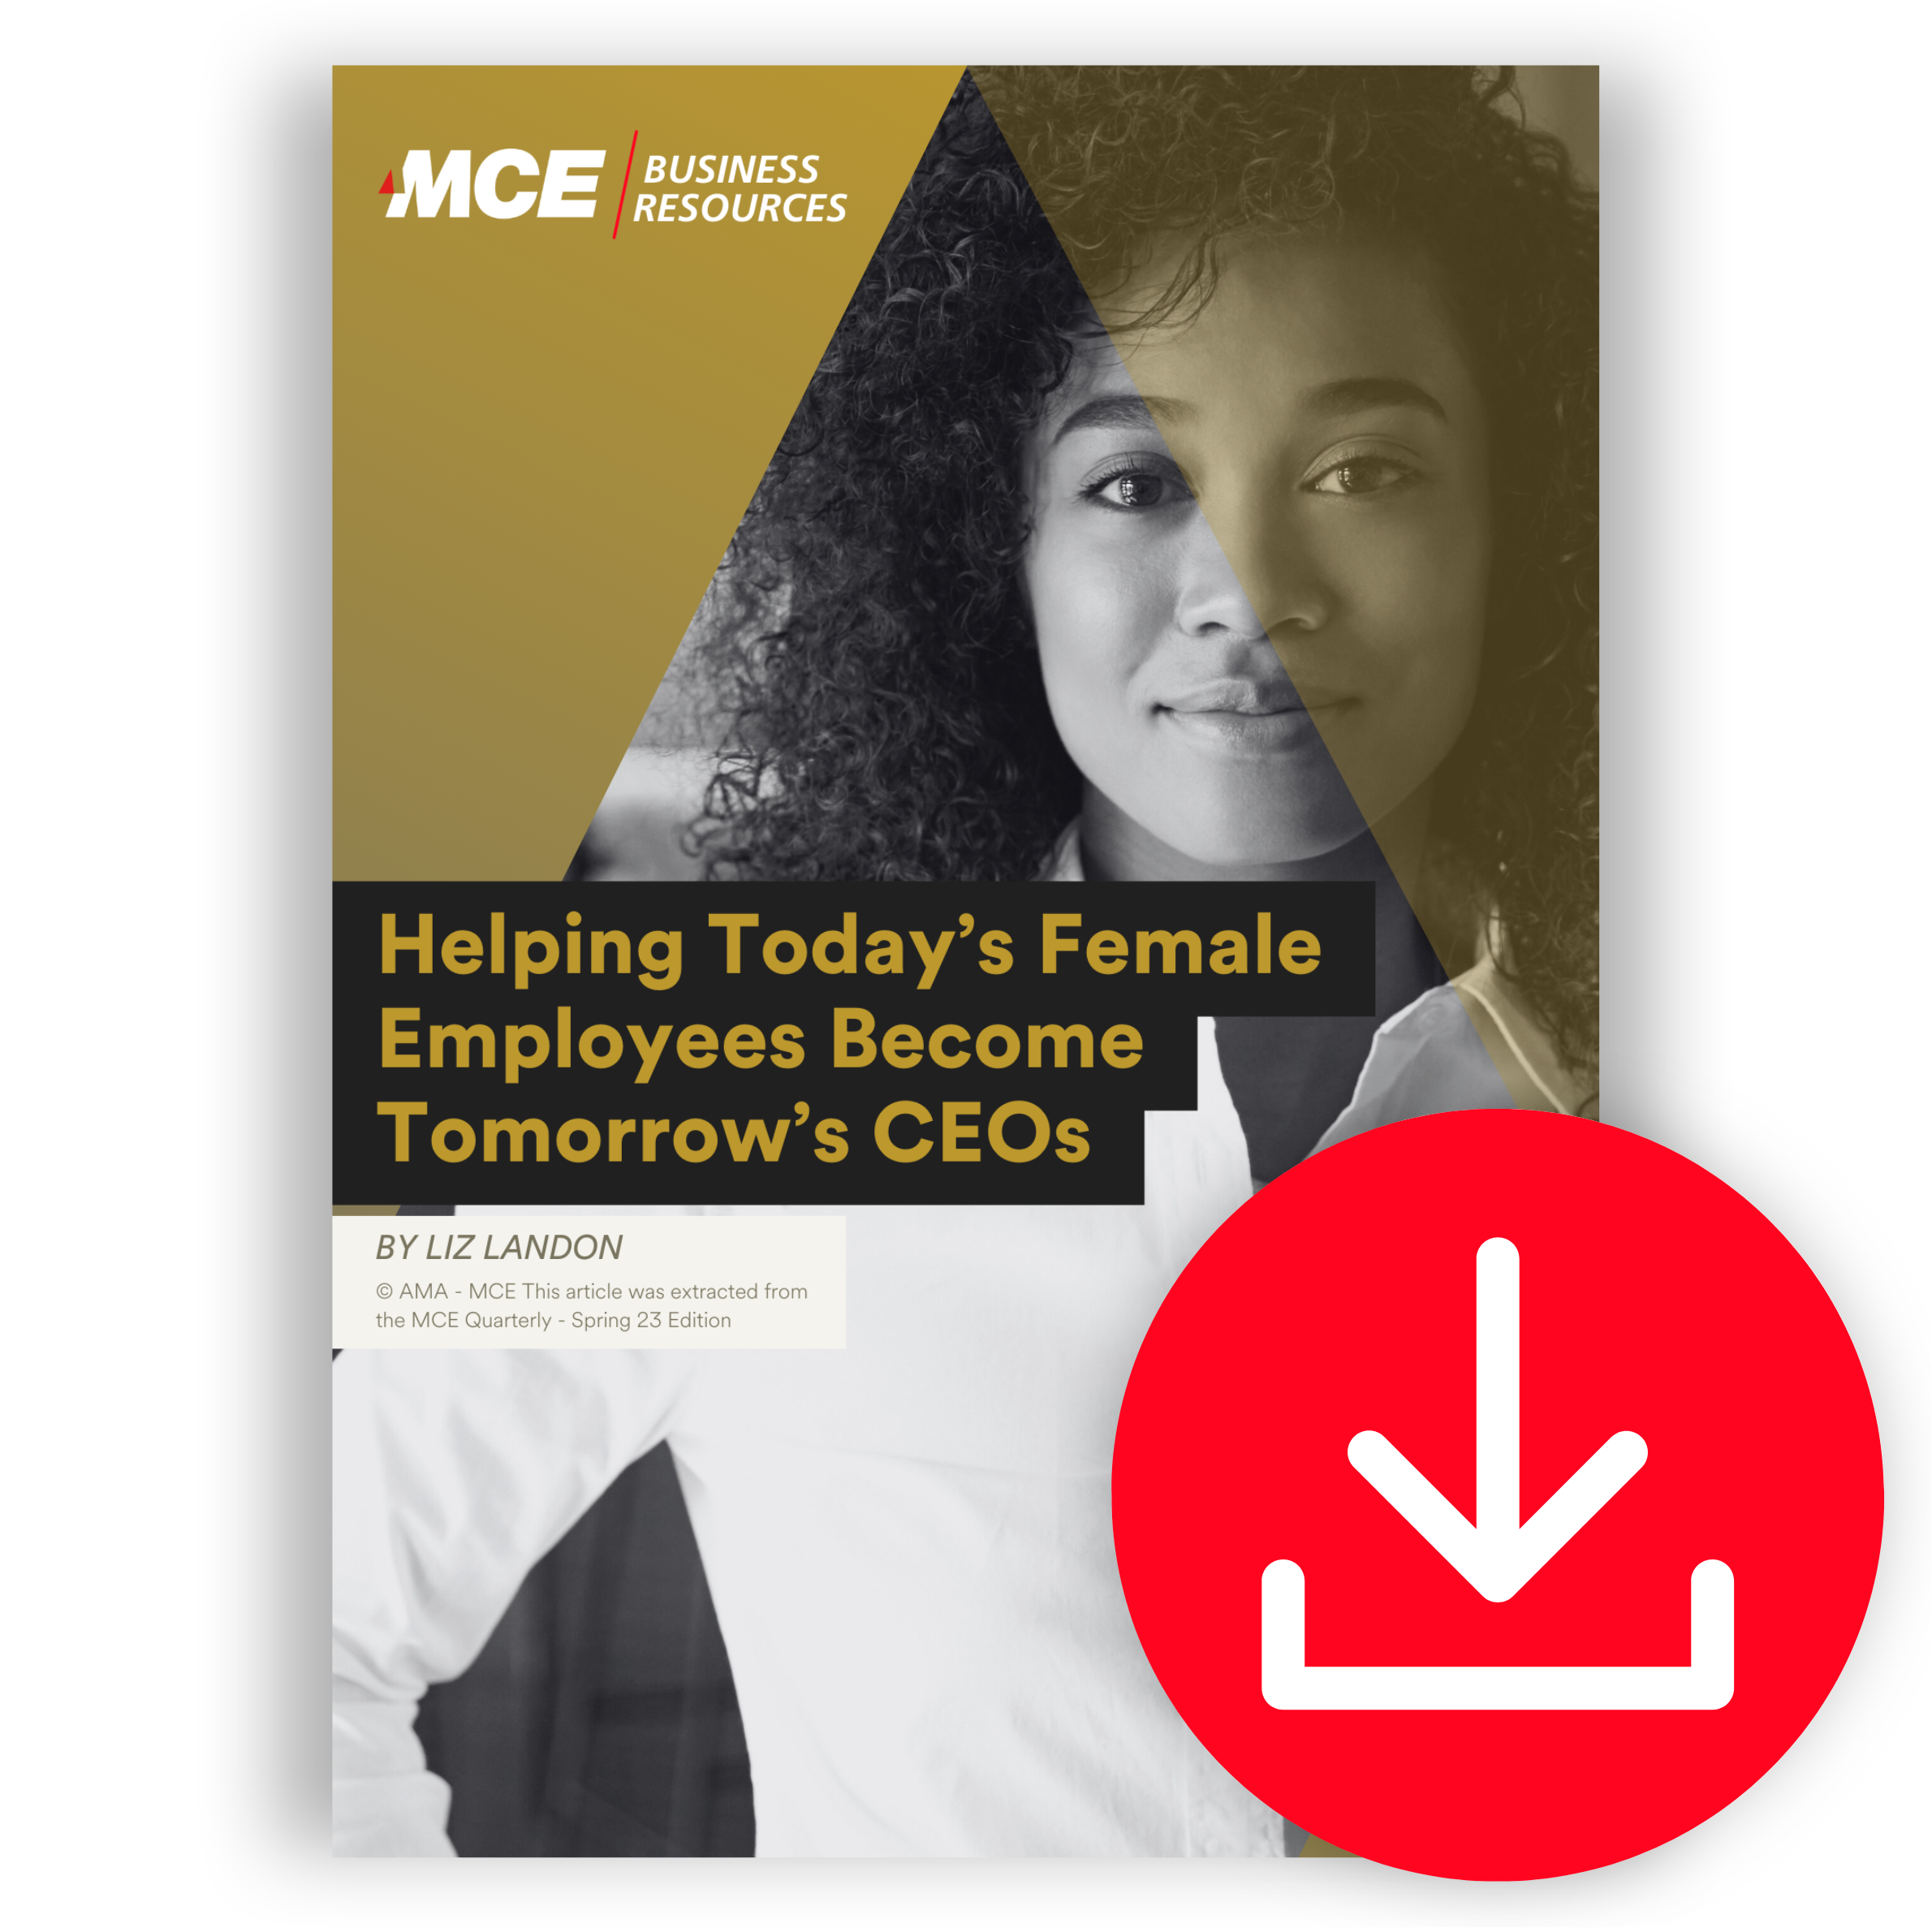 Helping Today’s Female Employees Become Tomorrow’s CEOs